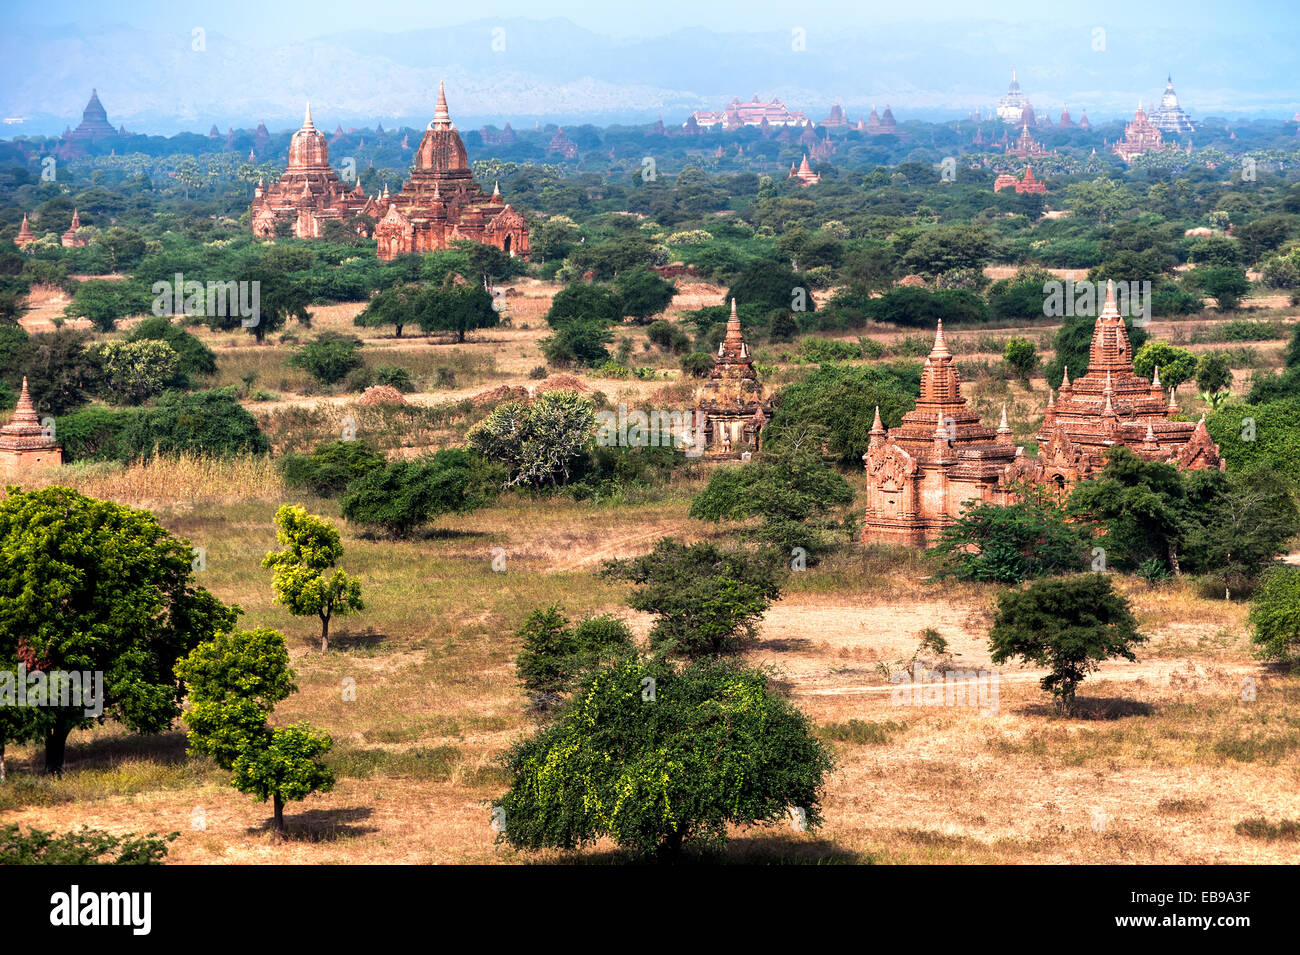 Travel landscapes and destinations. Amazing architecture of old Buddhist Temples at Bagan Kingdom, Myanmar (Burma) Stock Photo